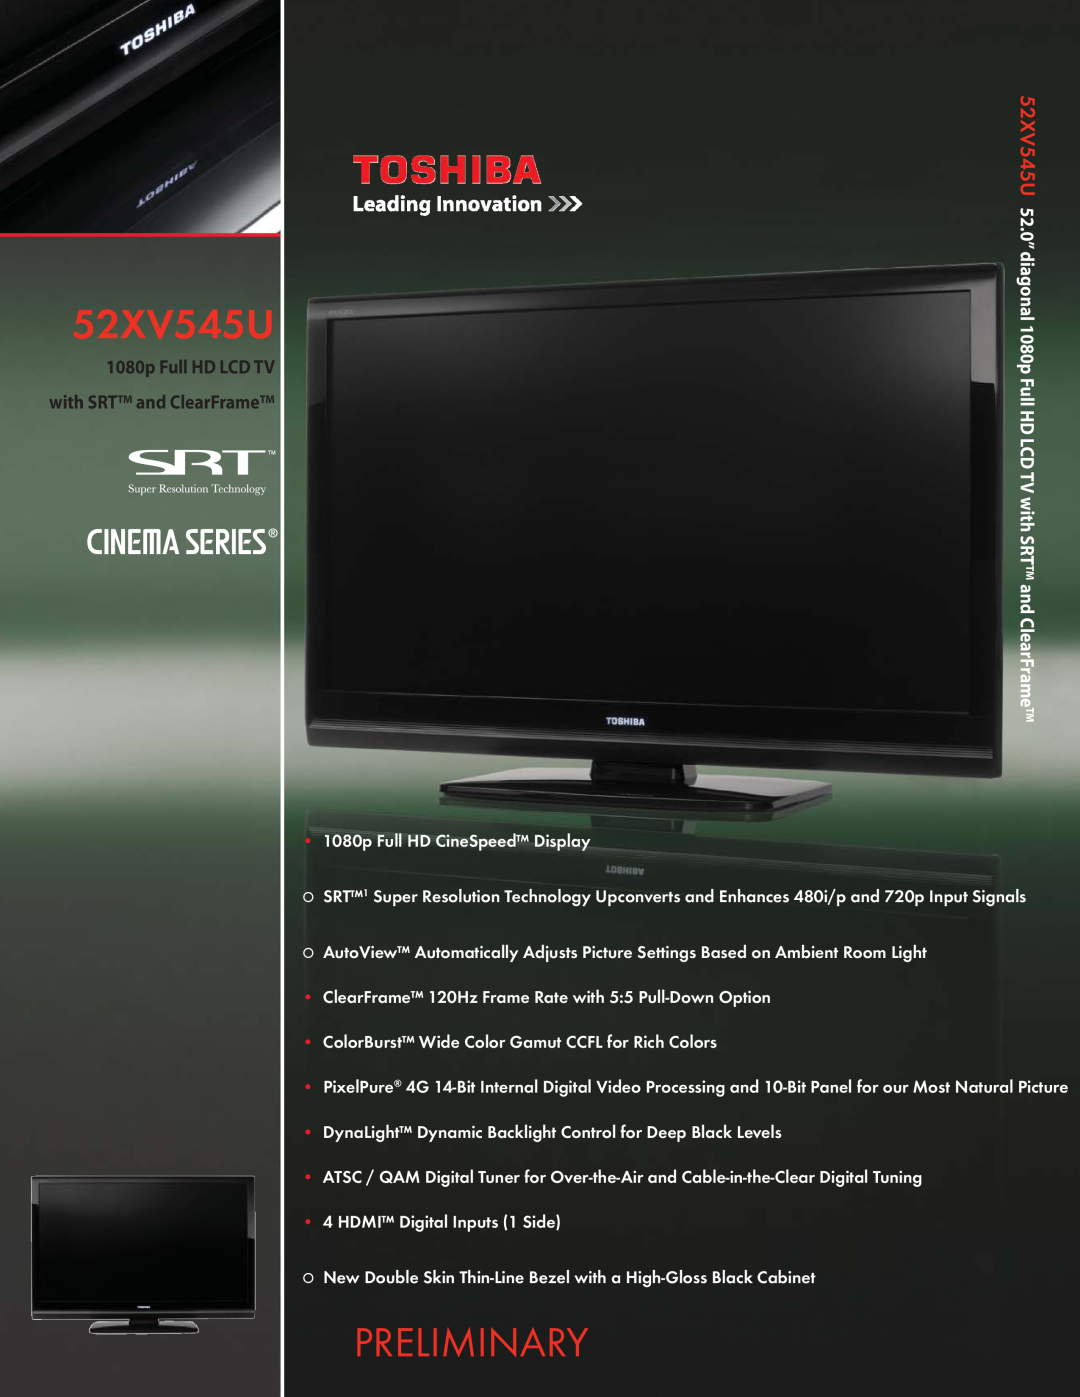 Toshiba 52XV545U manual Preliminary, 1080p Full HD LCD TV, with SRT and ClearFrame 